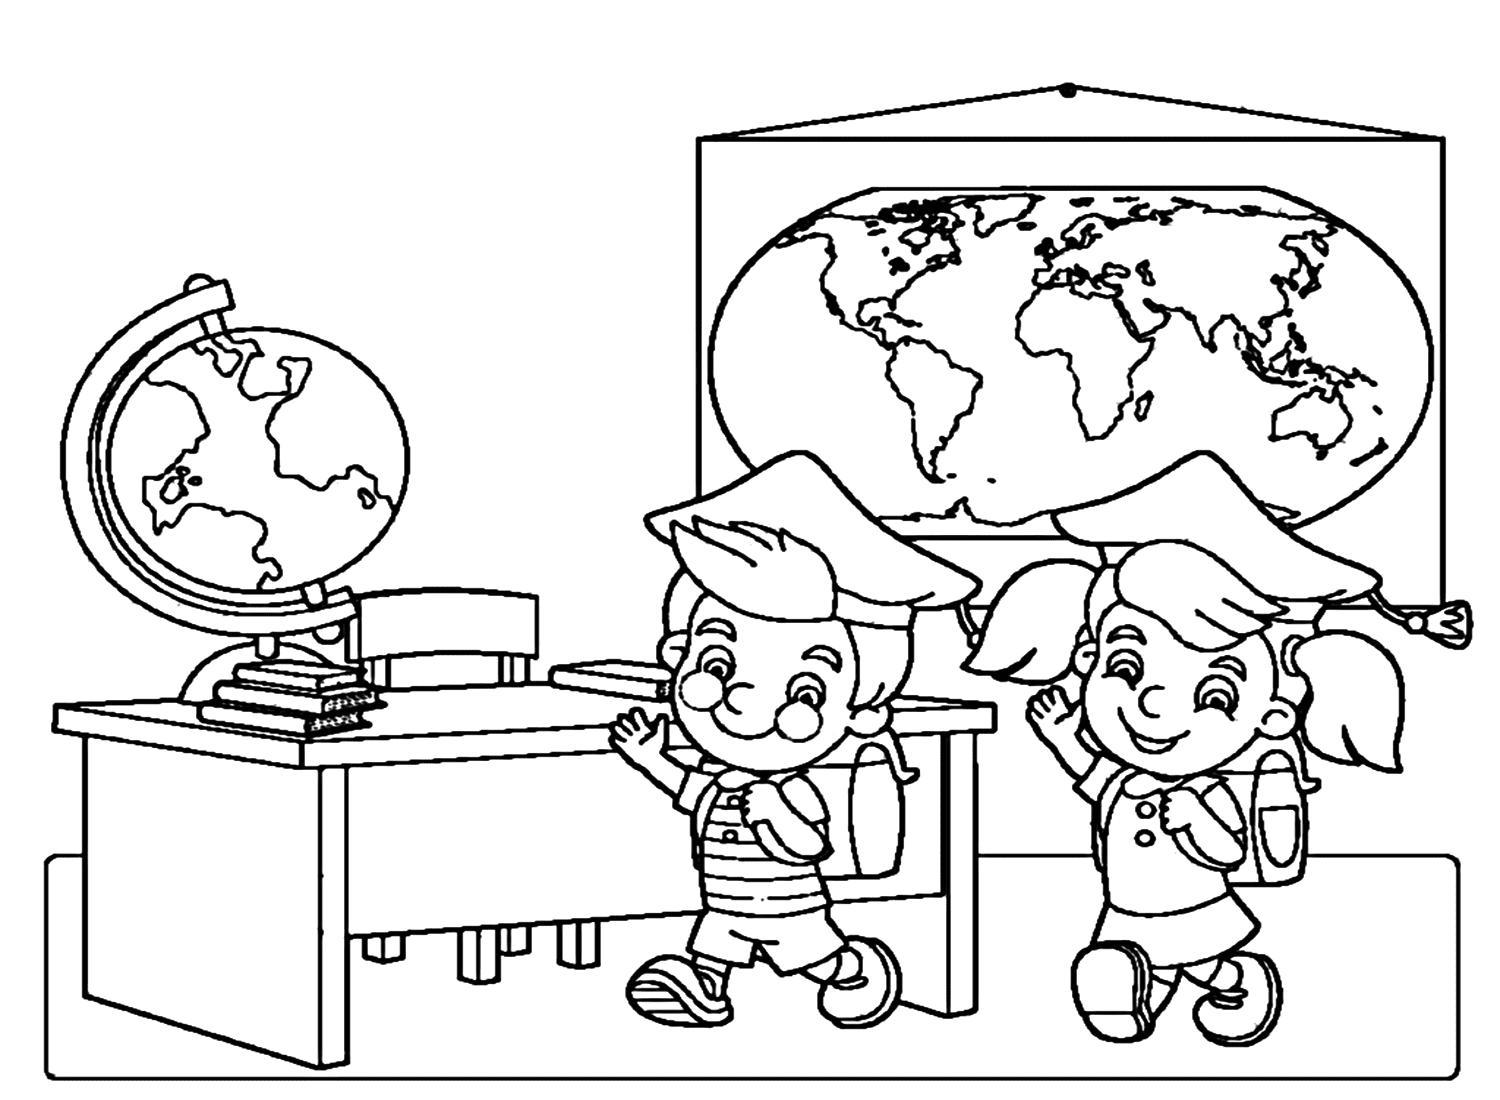 Geography Lesson On First Day Of School Coloring Page from First Day Of School